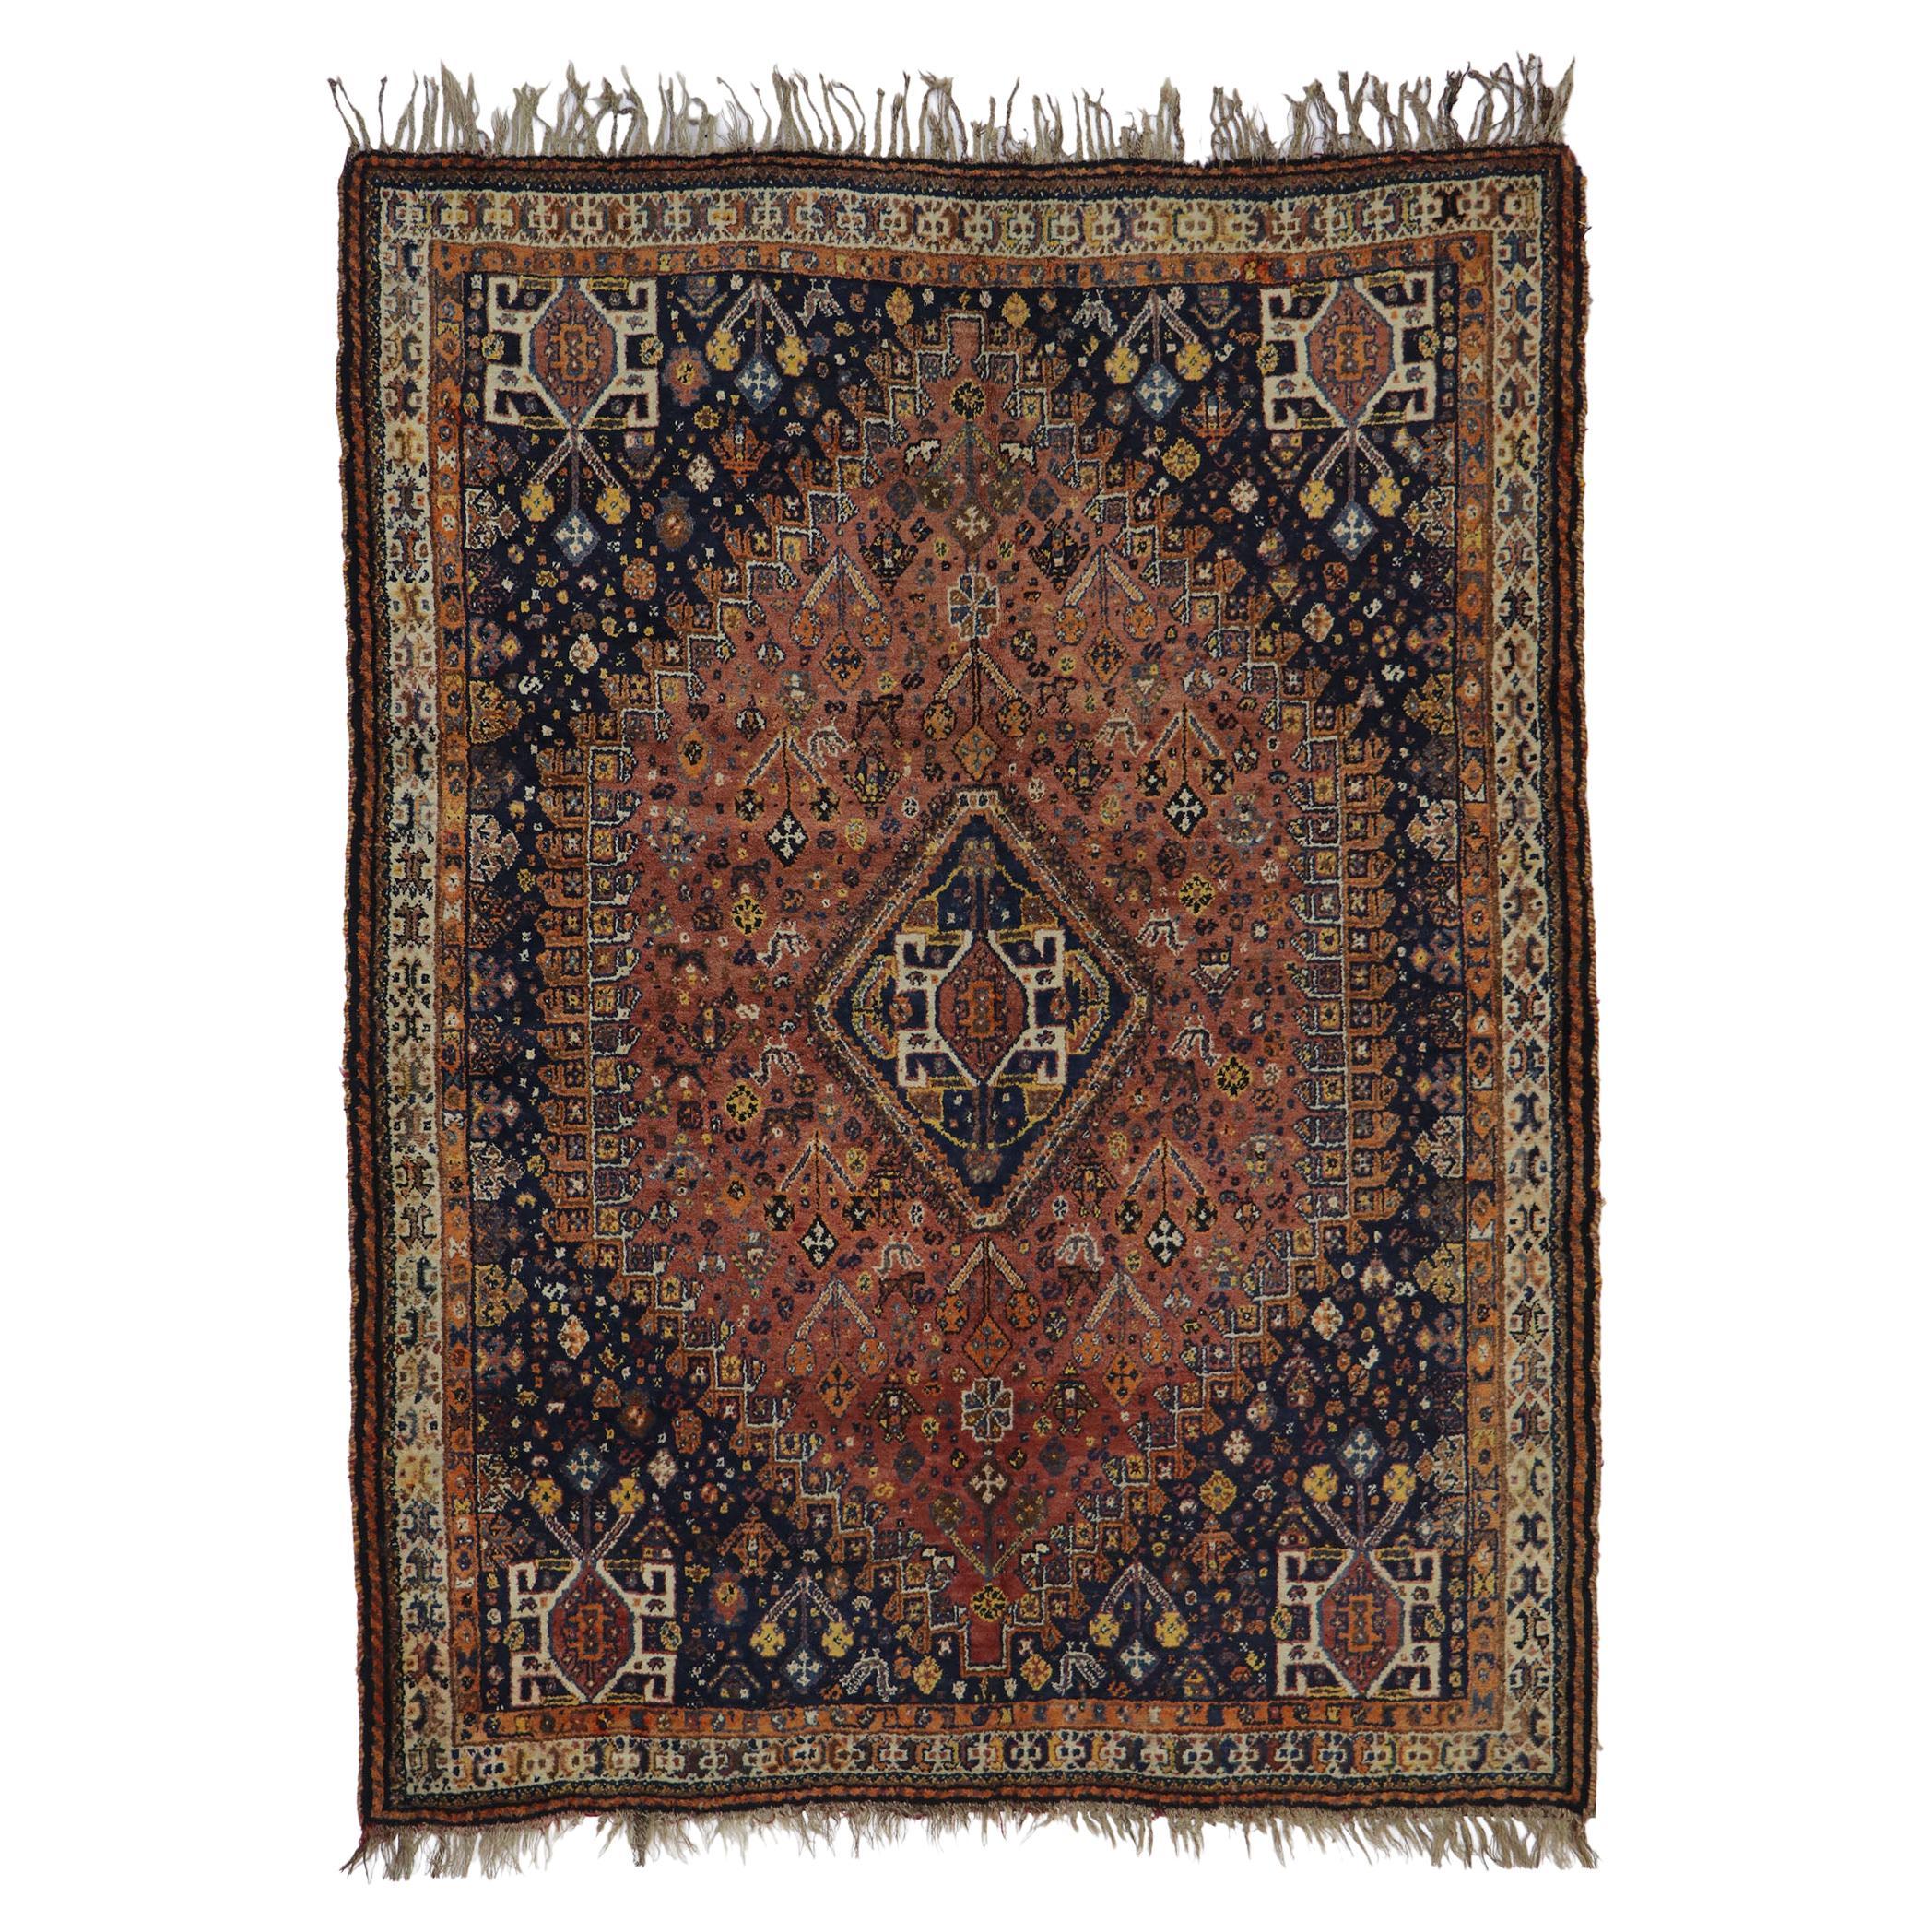 Antique Persian Shiraz Rug with Tribal Style